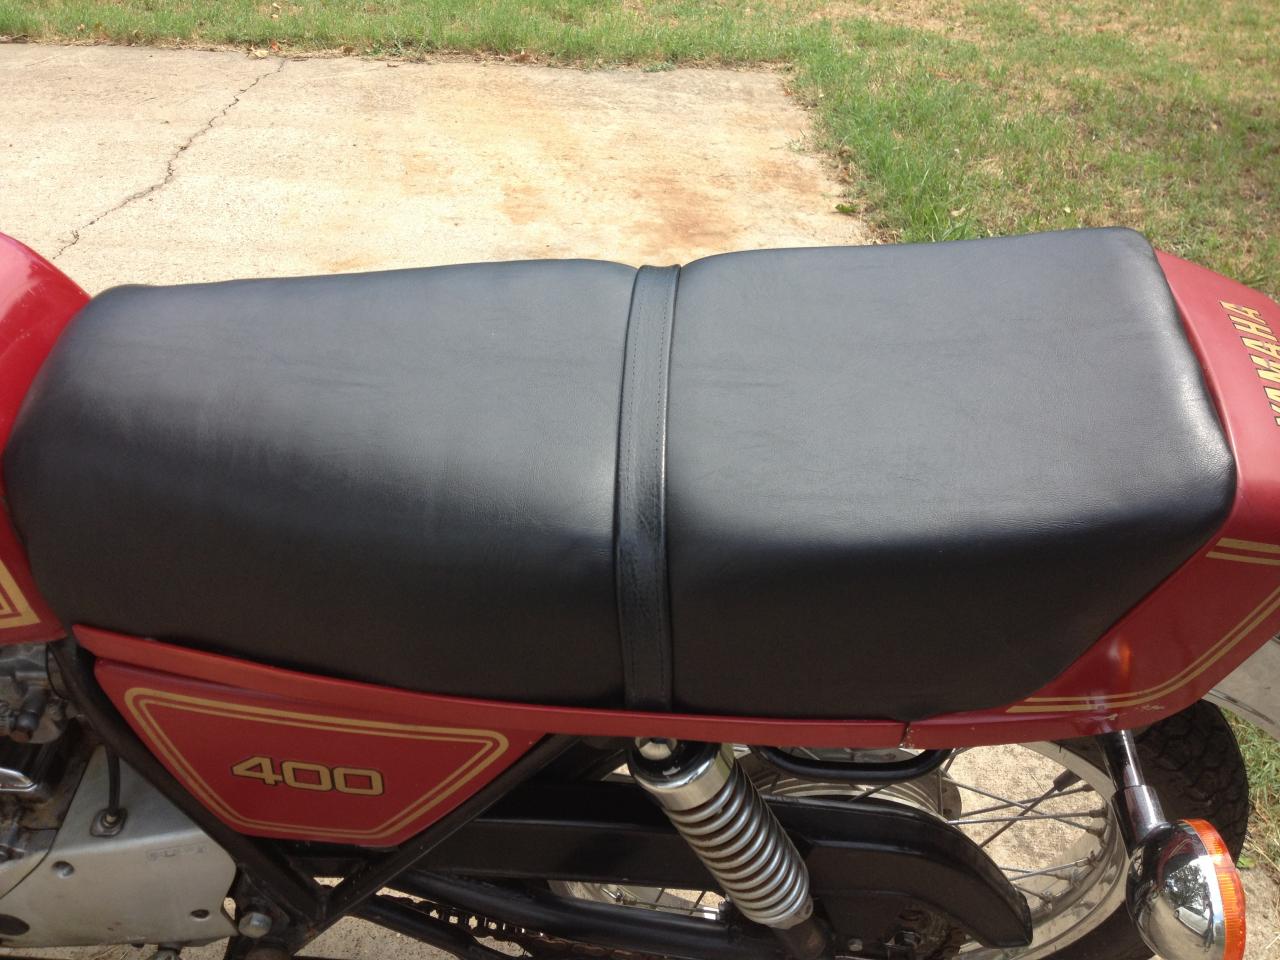 reupholstered seat with marine grade vinyl